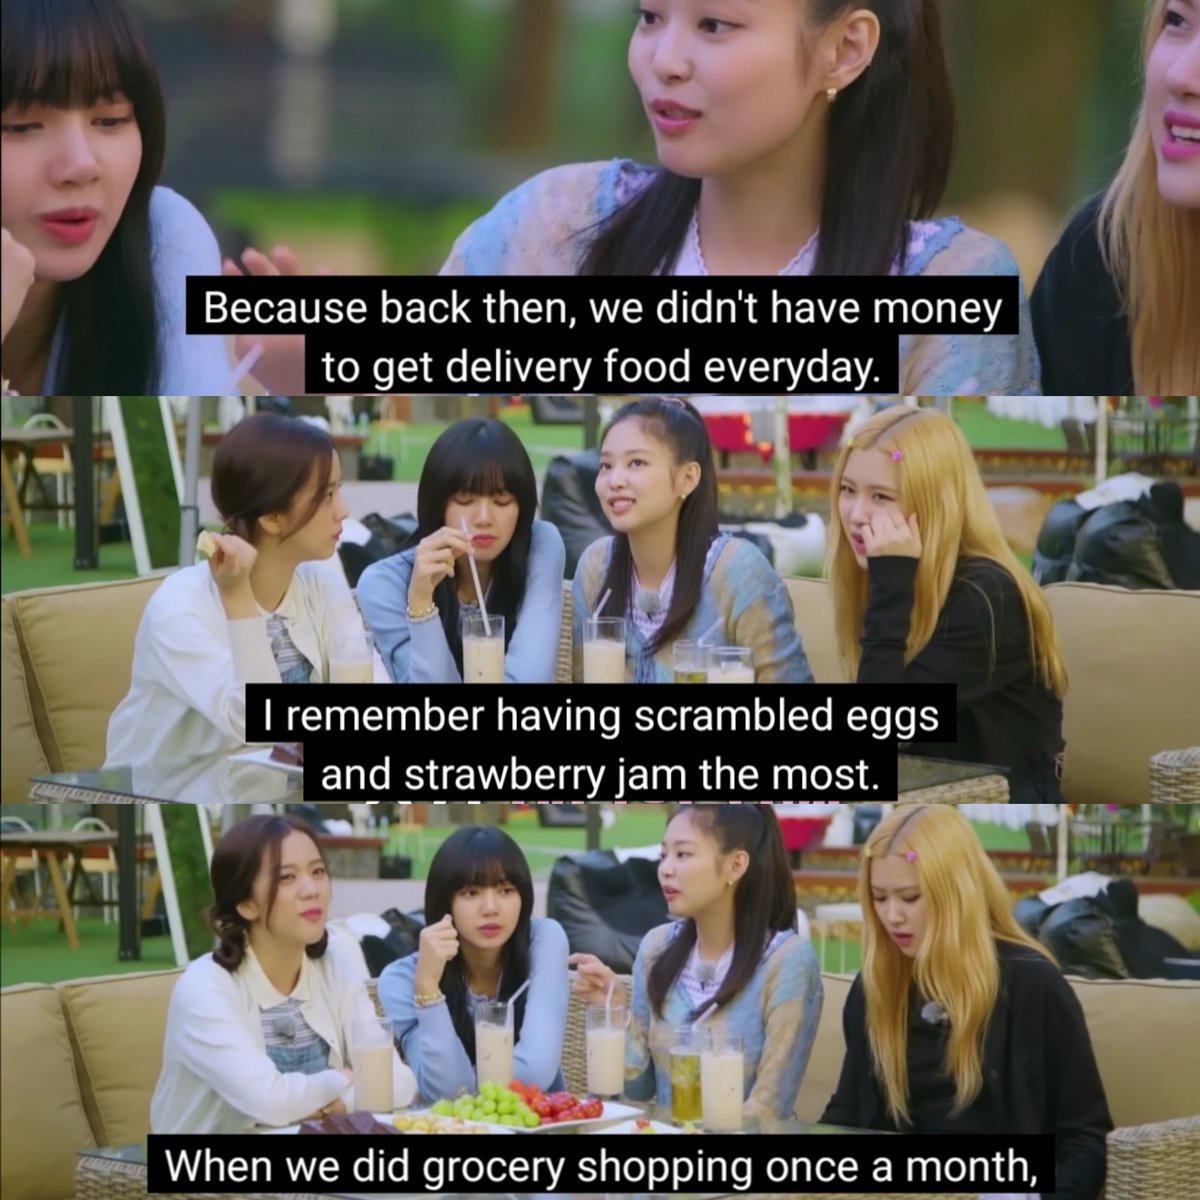 When they were rookies, they were on weekly idol and they asked for home furniture and a refrigerator because they didn't have any. They did grocery shopping once a month and ate scrambled eggs with strawberry jam(wtf) all the time because they didn't have money for delivery food